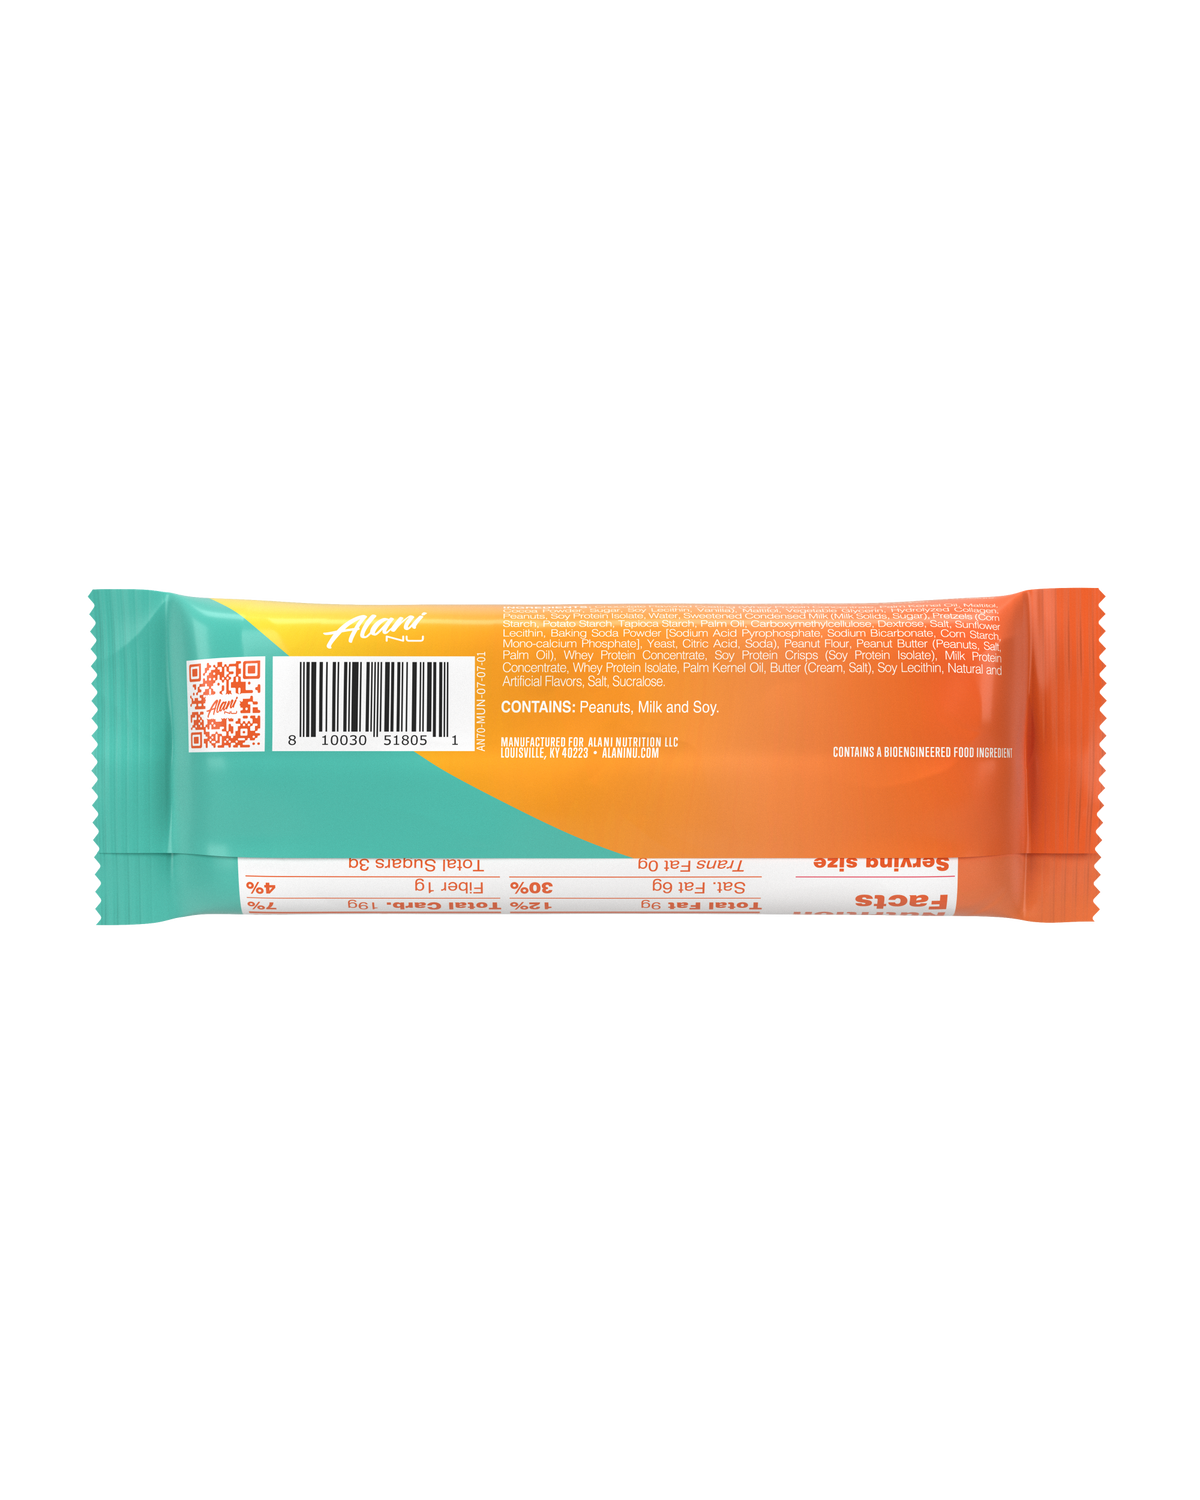  A back view of protein bar in flavor munchies displaying nutrition facts.